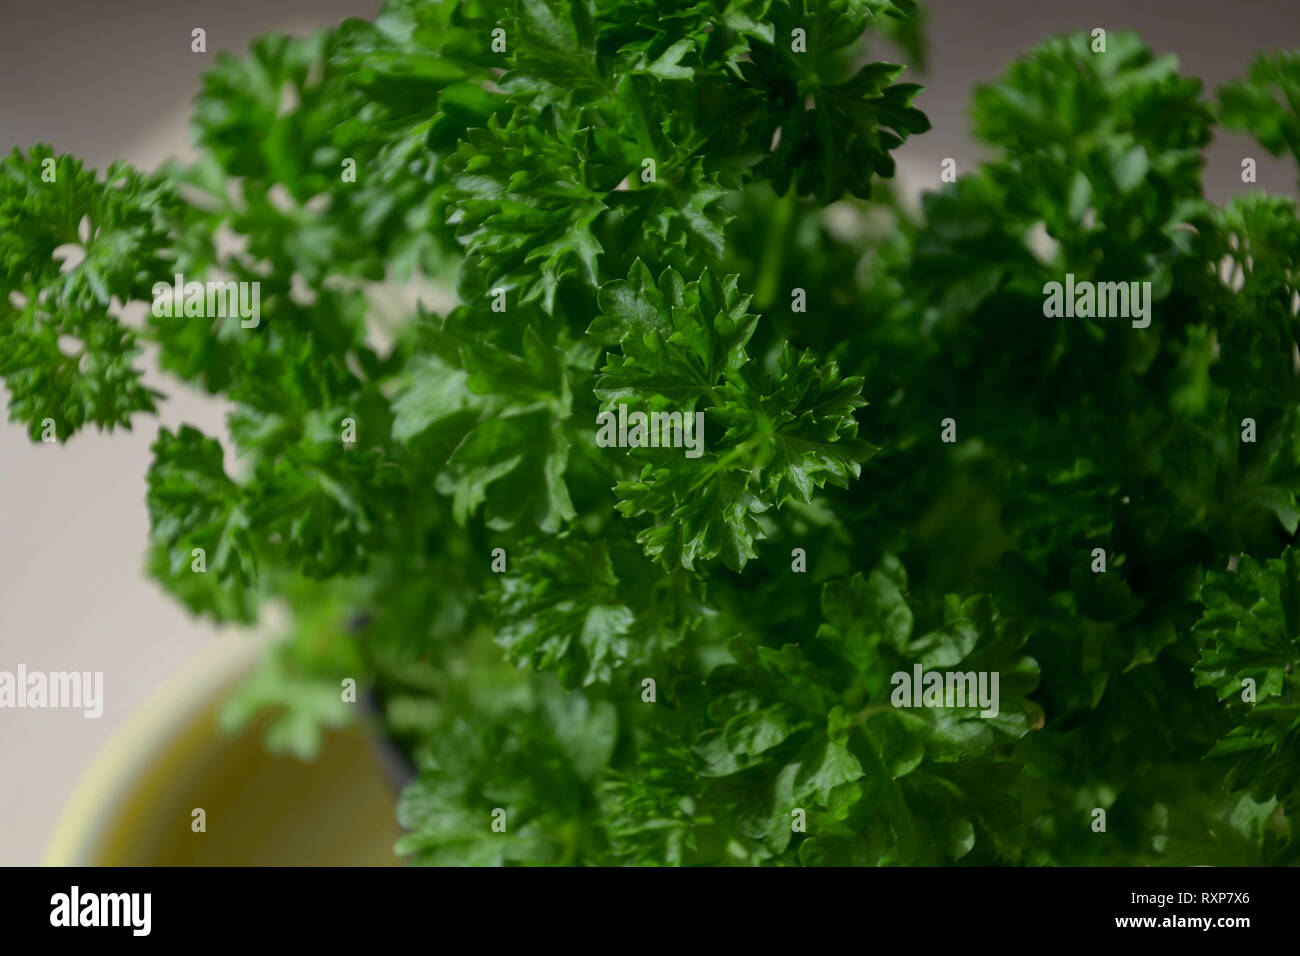 healthy parsley planted in a pot and ready for harvest, petroselinum crispum also called garden parsley growing in a pot indoors in a kitchen as a spi Stock Photo